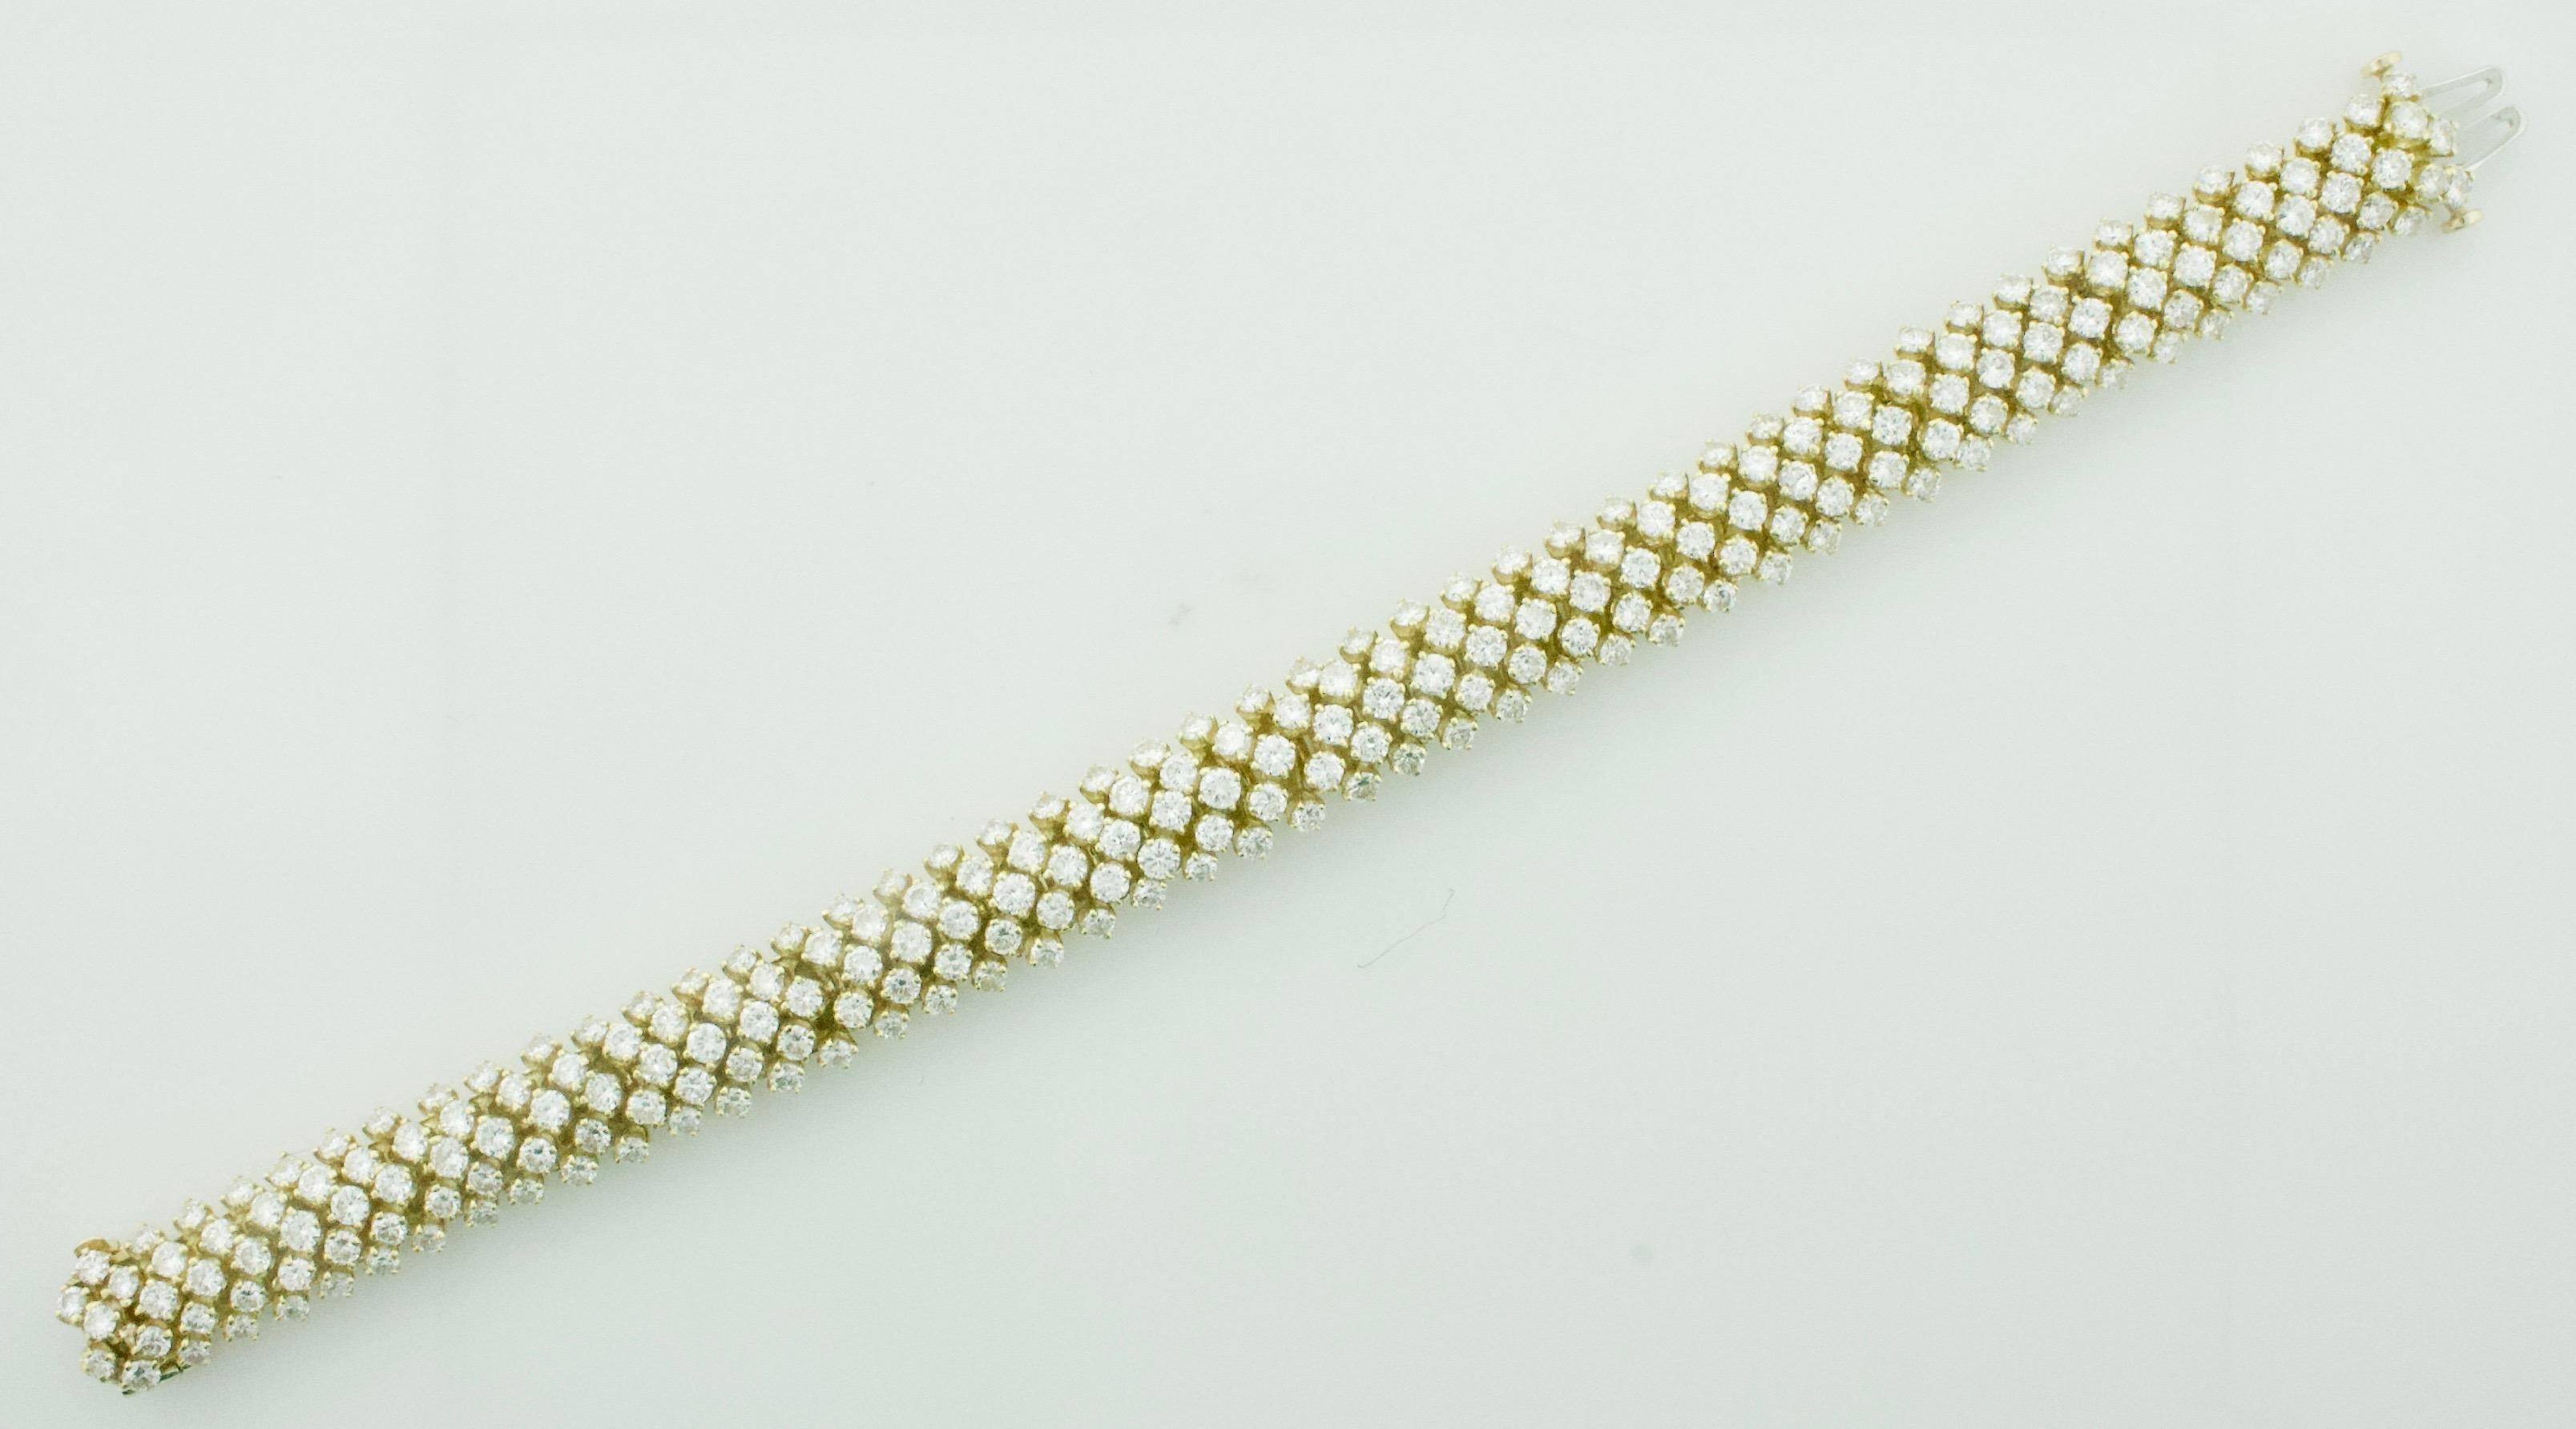 Classy Diamond Bracelet in 18k Yellow Gold
235 Round Brilliant Cut Diamonds Weighing 12.00 Carats Approximately [GHI - VVS1-VS1]
[bright with no imperfections visible to the naked eye]
Flexible as Can Be.  Extreamly Comfortable.  A Show Stopper For